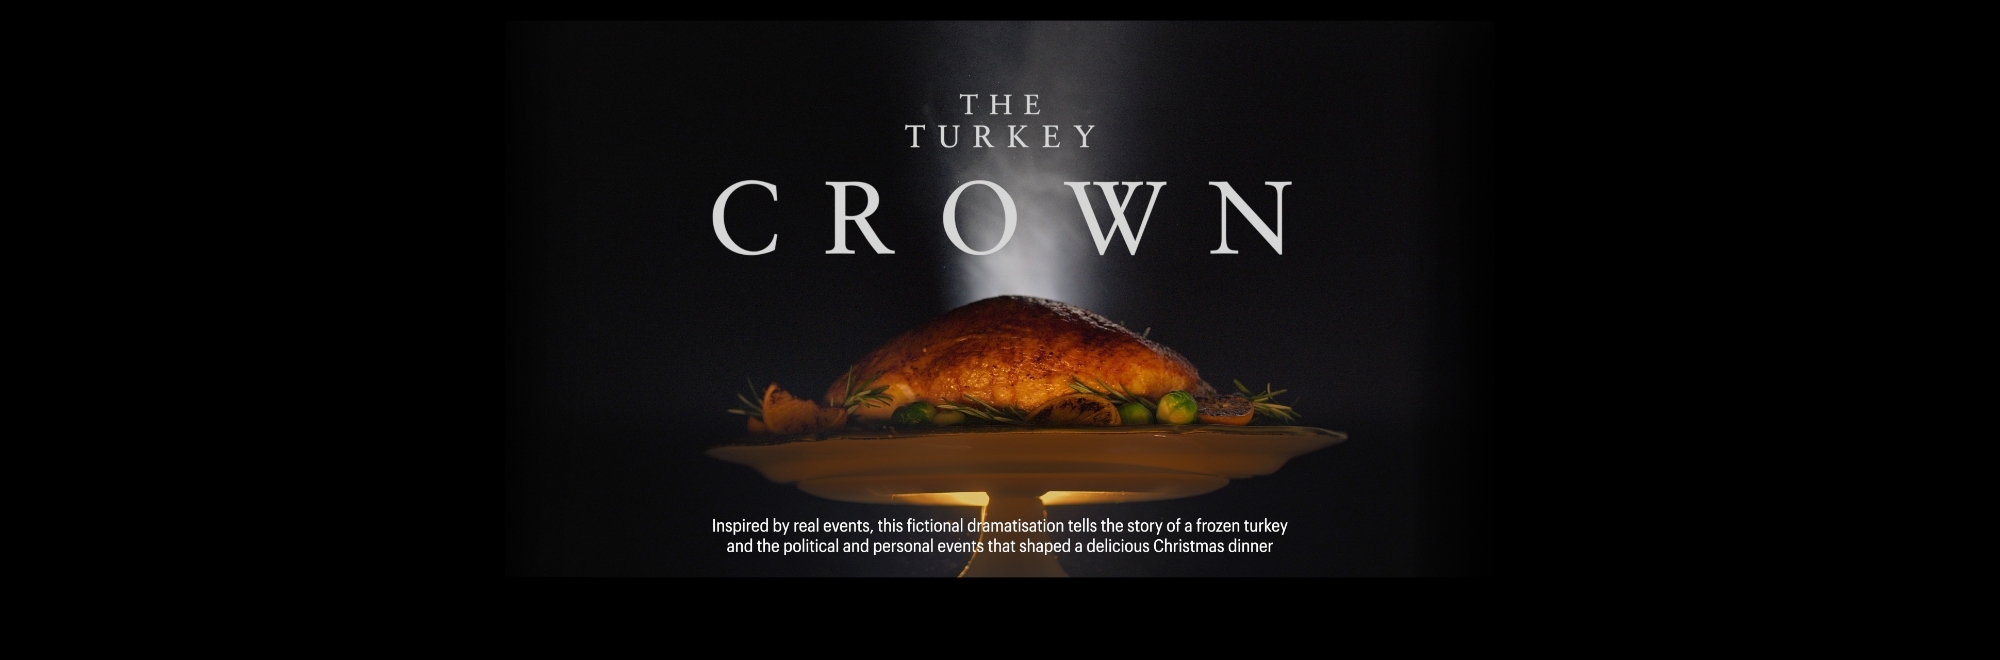 The Turkey Crown: Iceland pays homage to the Netflix series in its Christmas campaign